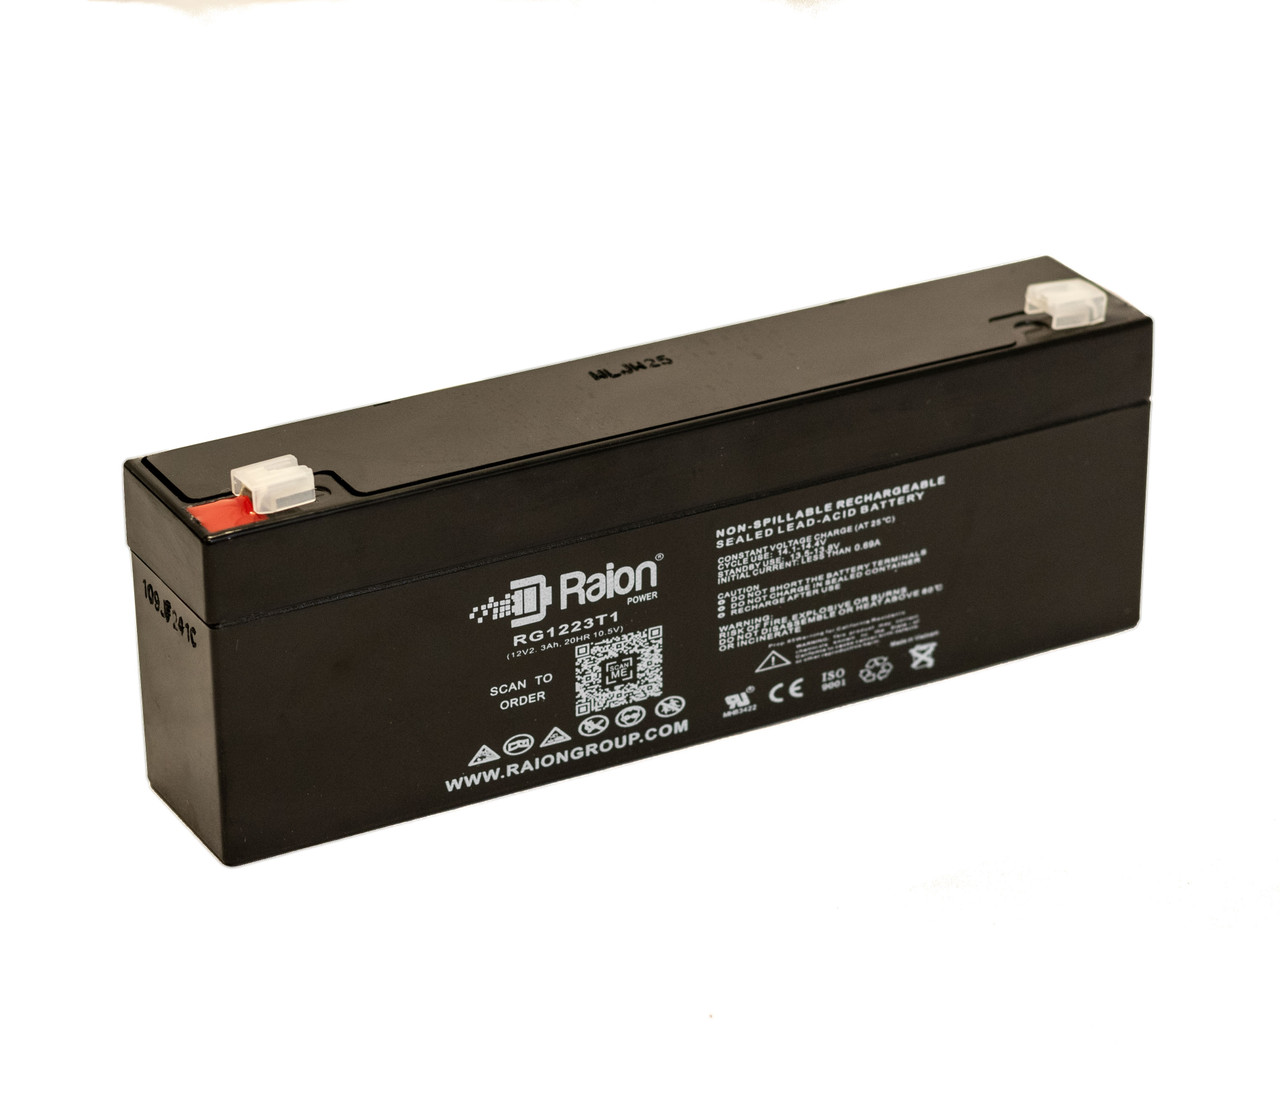 Raion Power RG1223T1 Replacement Battery for Alexander MB5089